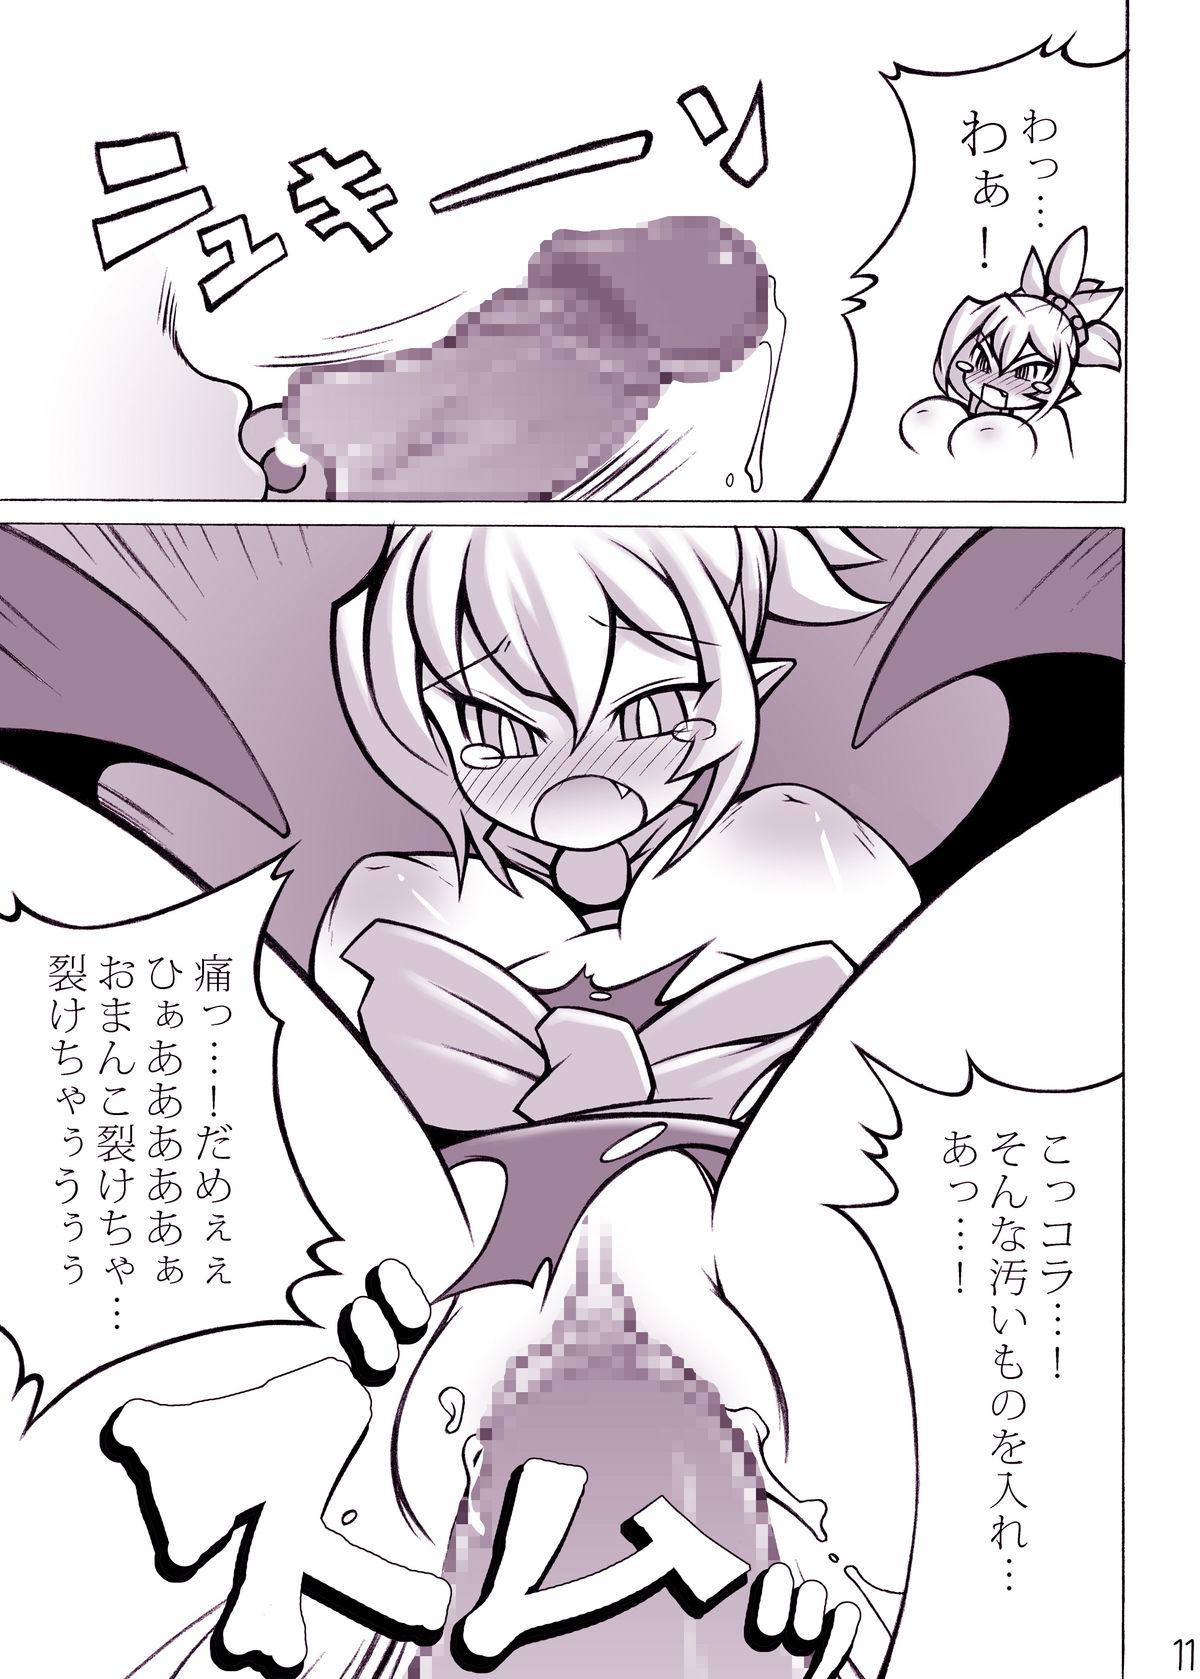 Dominate Royal Oppai - Disgaea Belly - Page 10